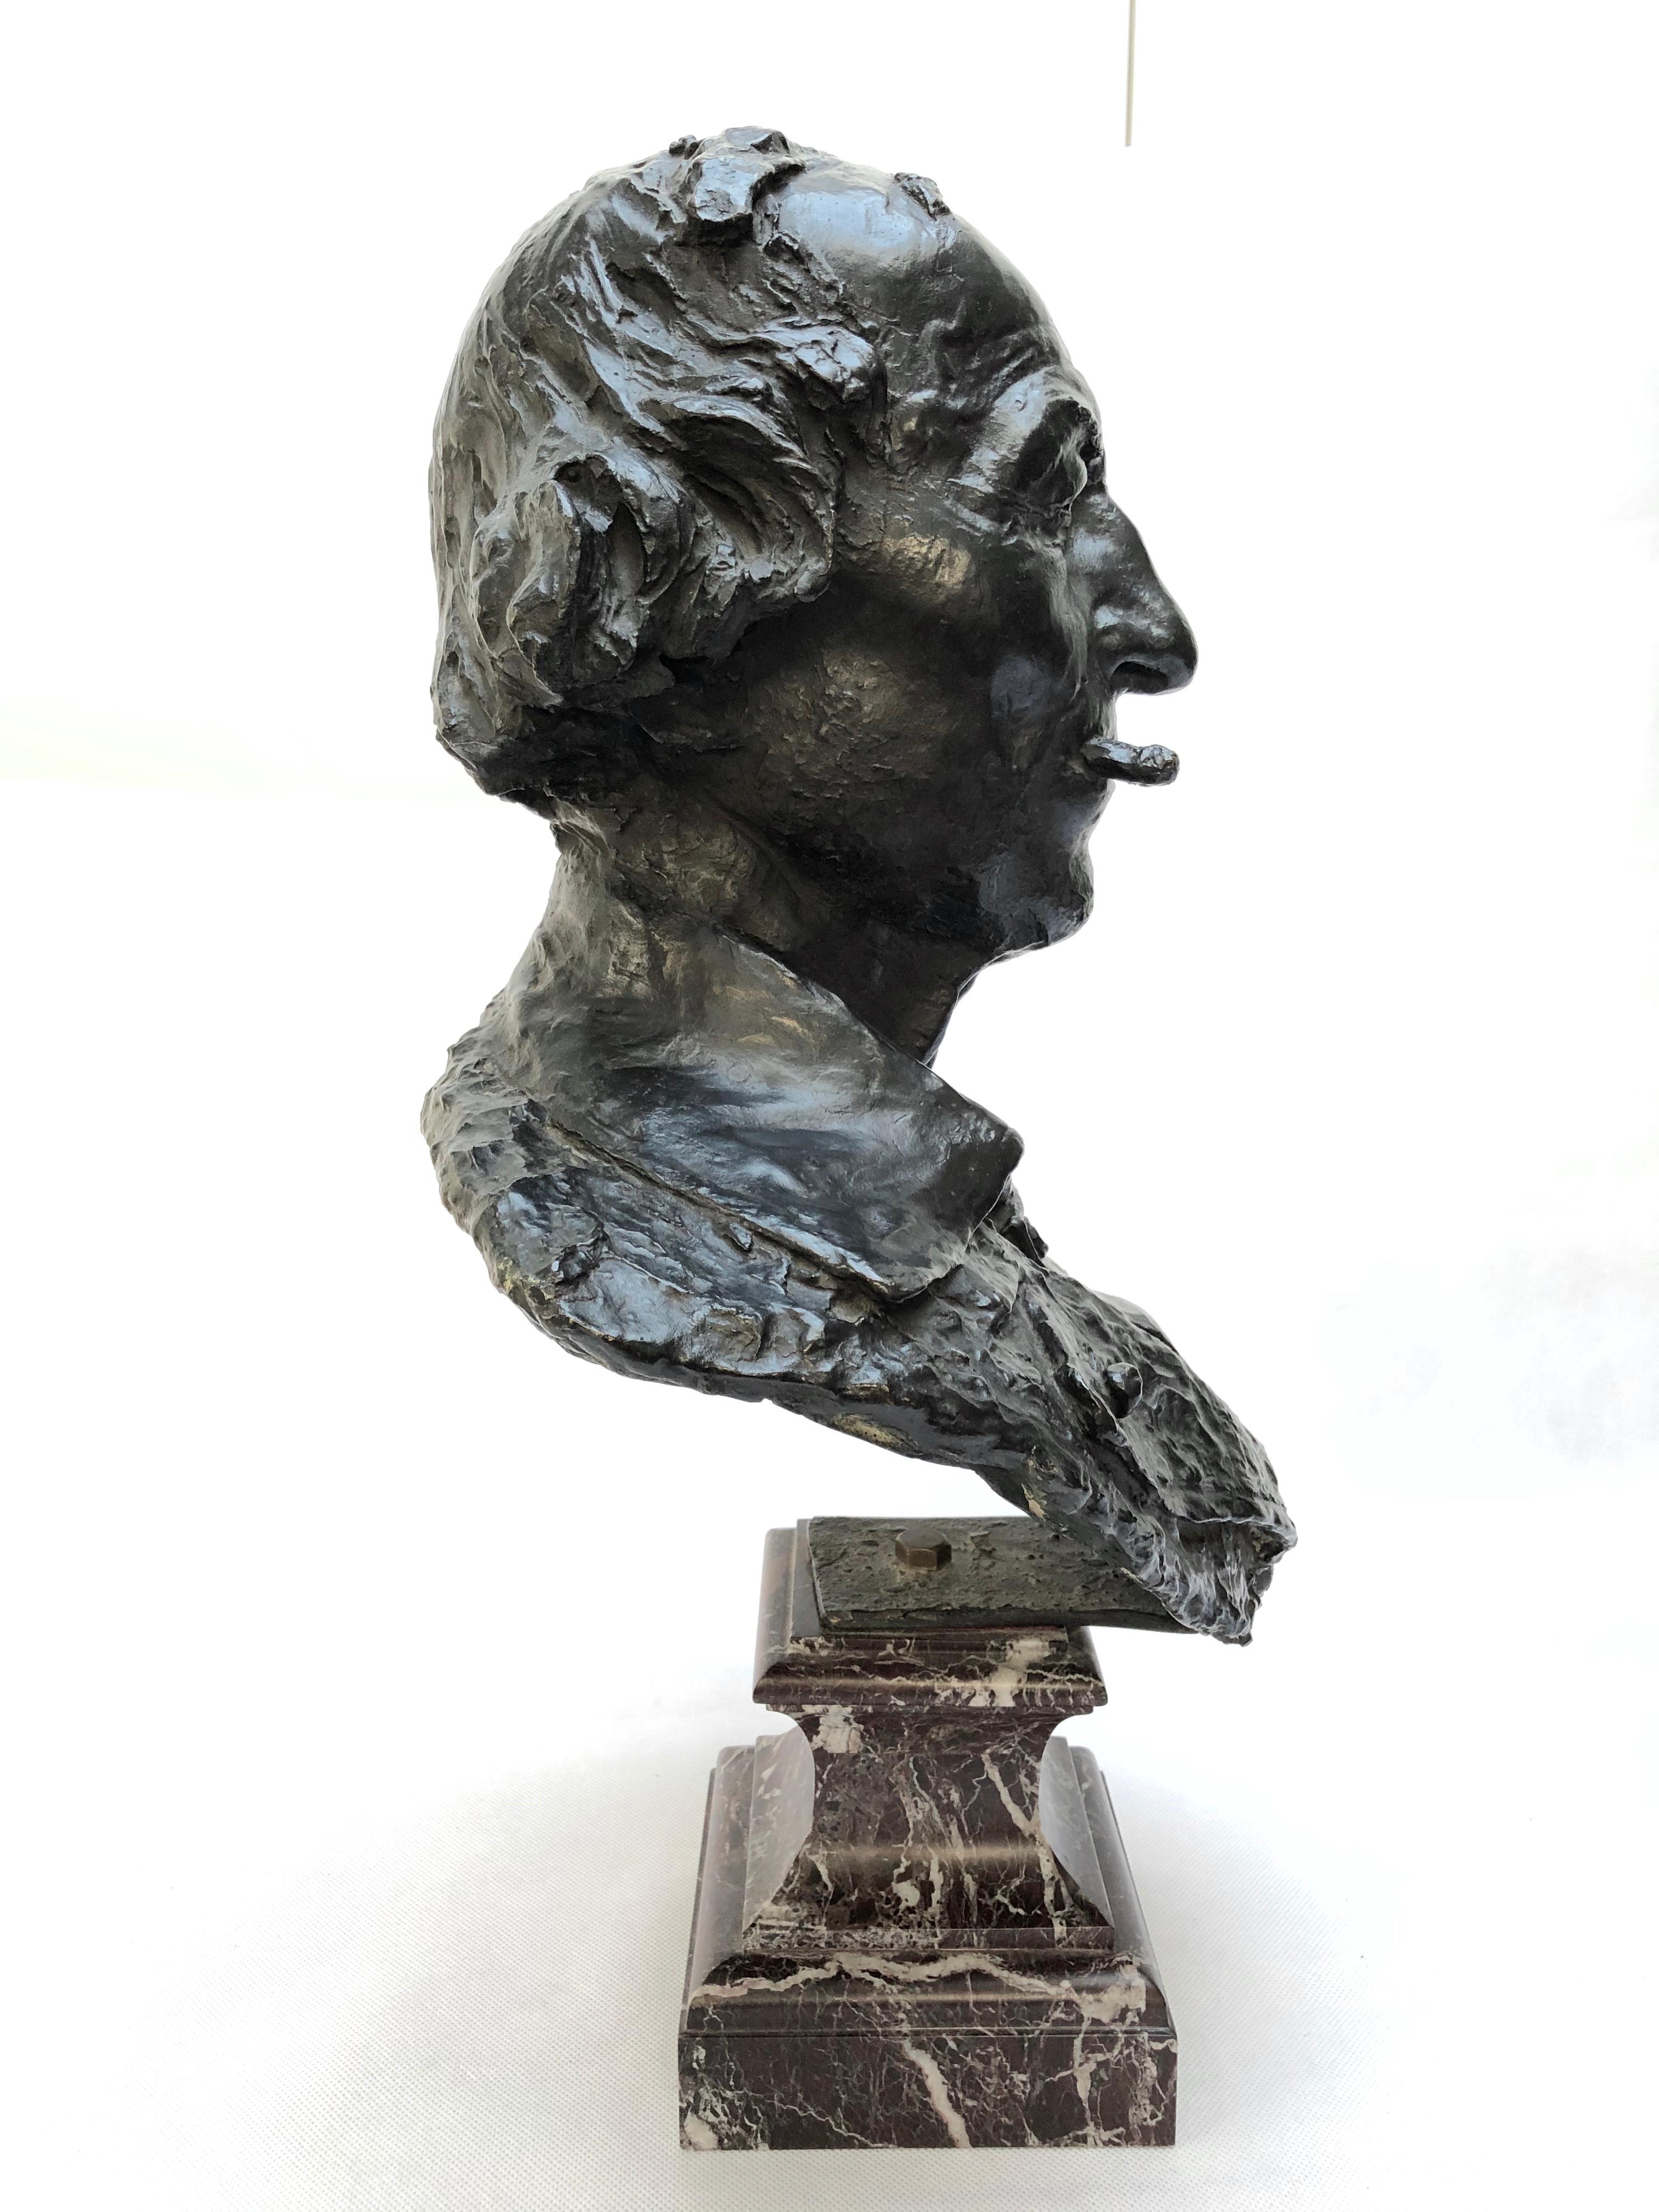 Cast French Bronze Bust by Jean-Baptiste Carpeaux, Known as “Le Fumeur”, Dated 1869